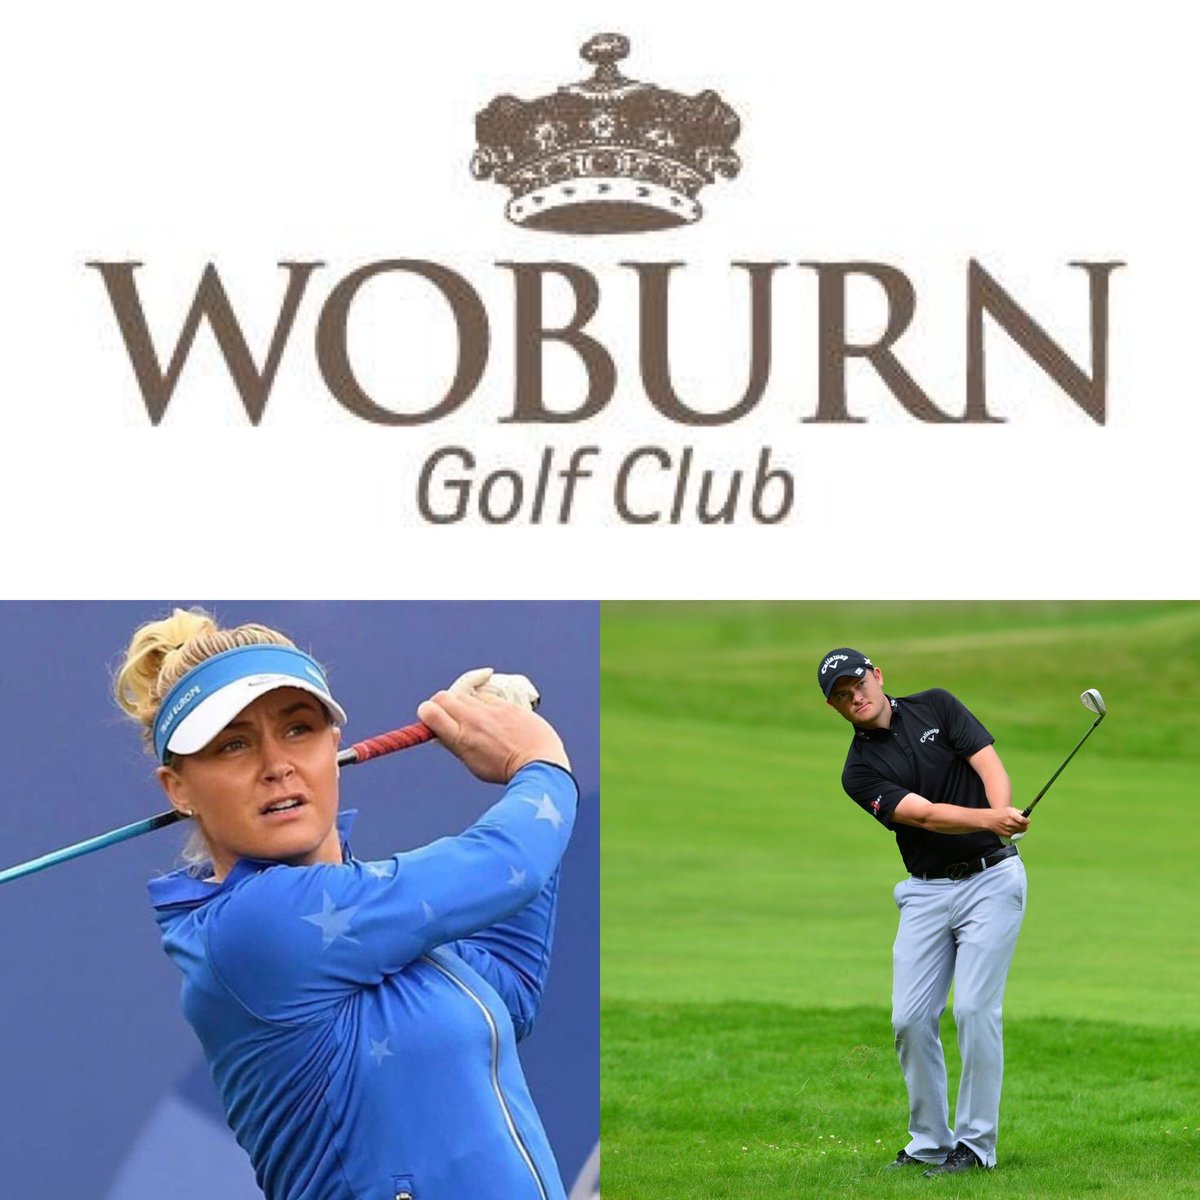 Really big thanks to European tour golfers @GaryBoyd86 and @HullCharley playing with two guests at the amazing @WoburnGC !! Retweet please